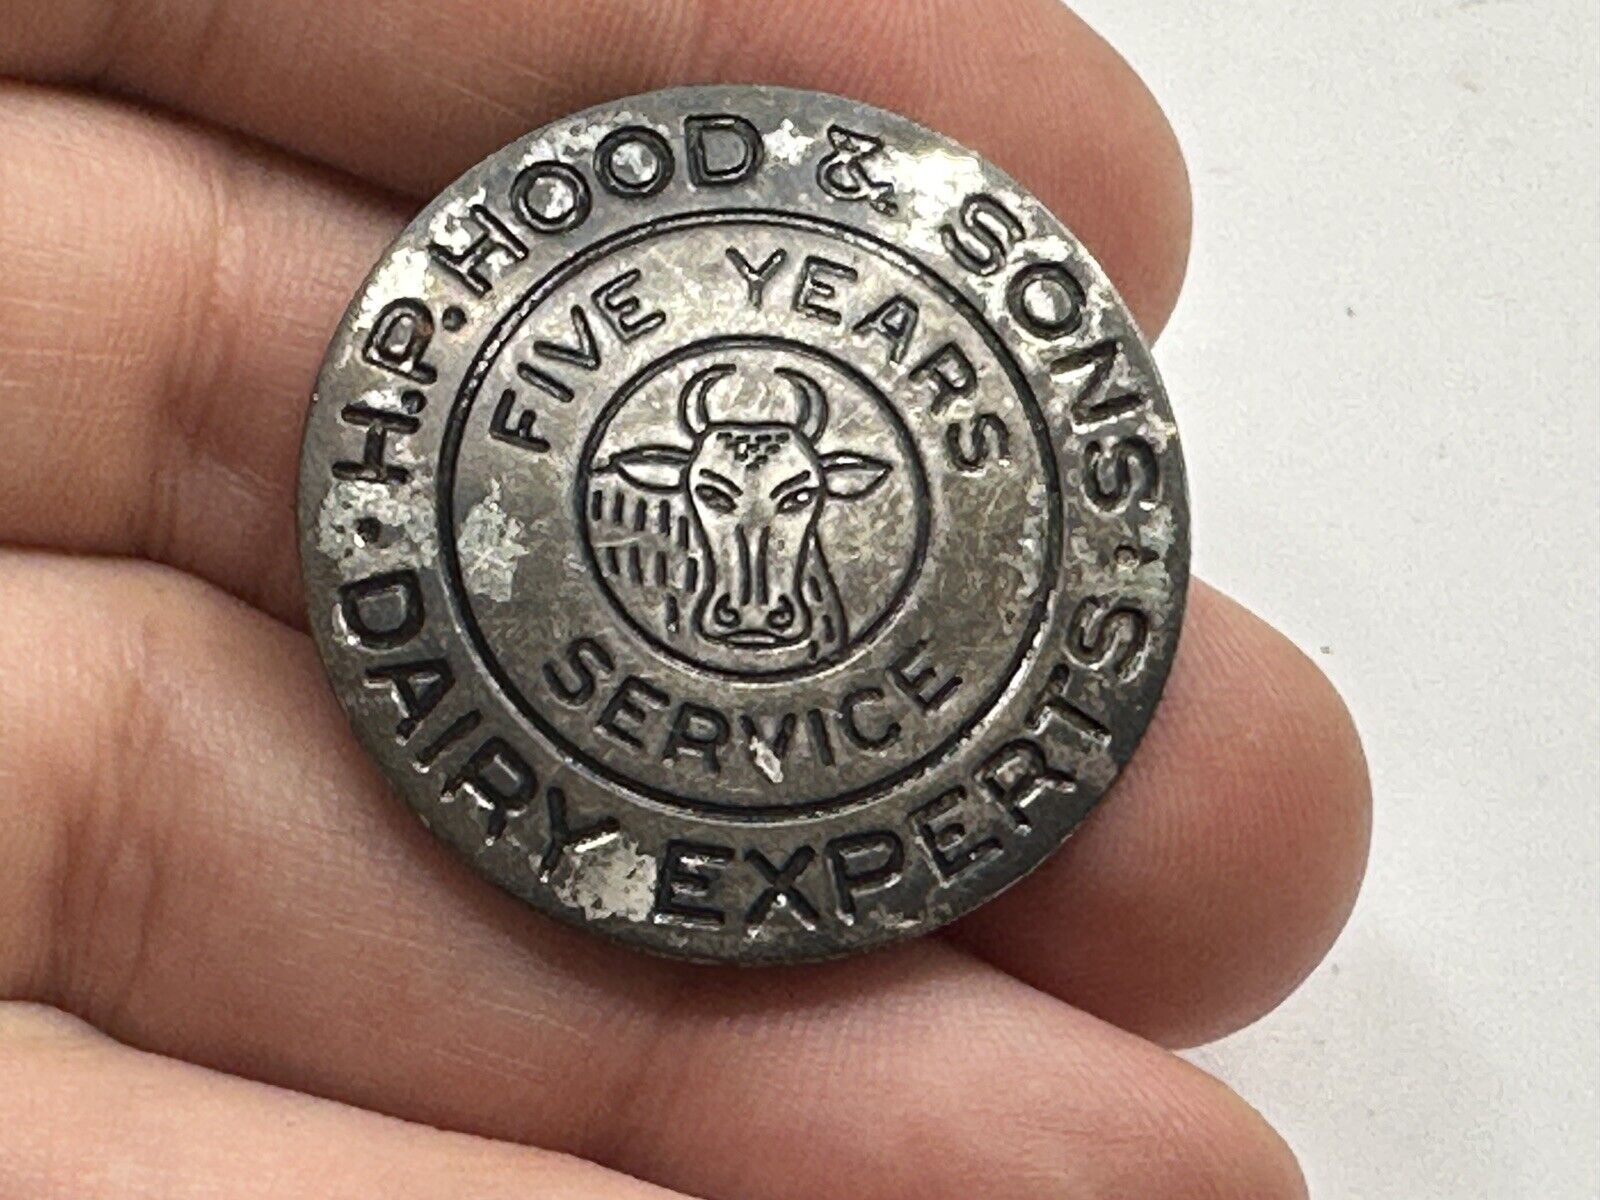 Vintage H.P. Hood & Sons Five Year Service Pin Dairy Experts